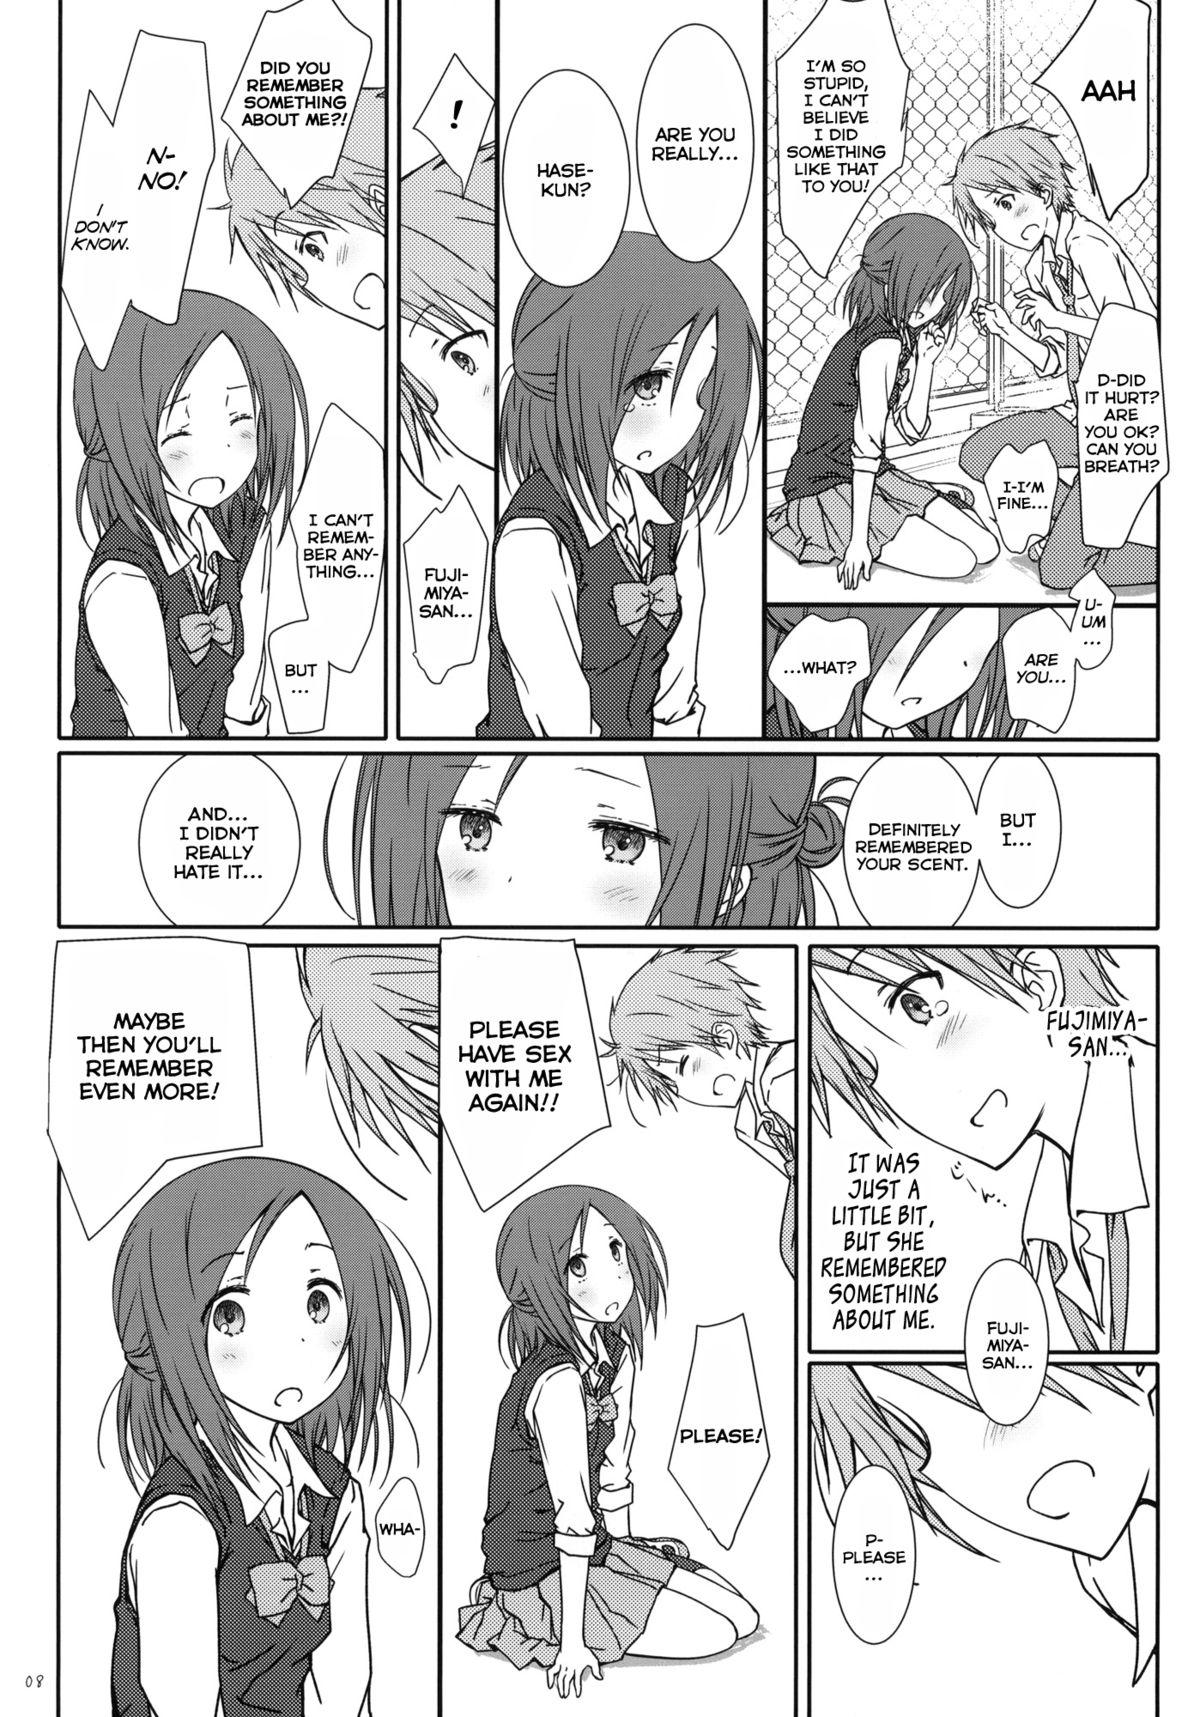 Caliente "Tomodachi to no Sex." - One week friends Massage Creep - Page 7